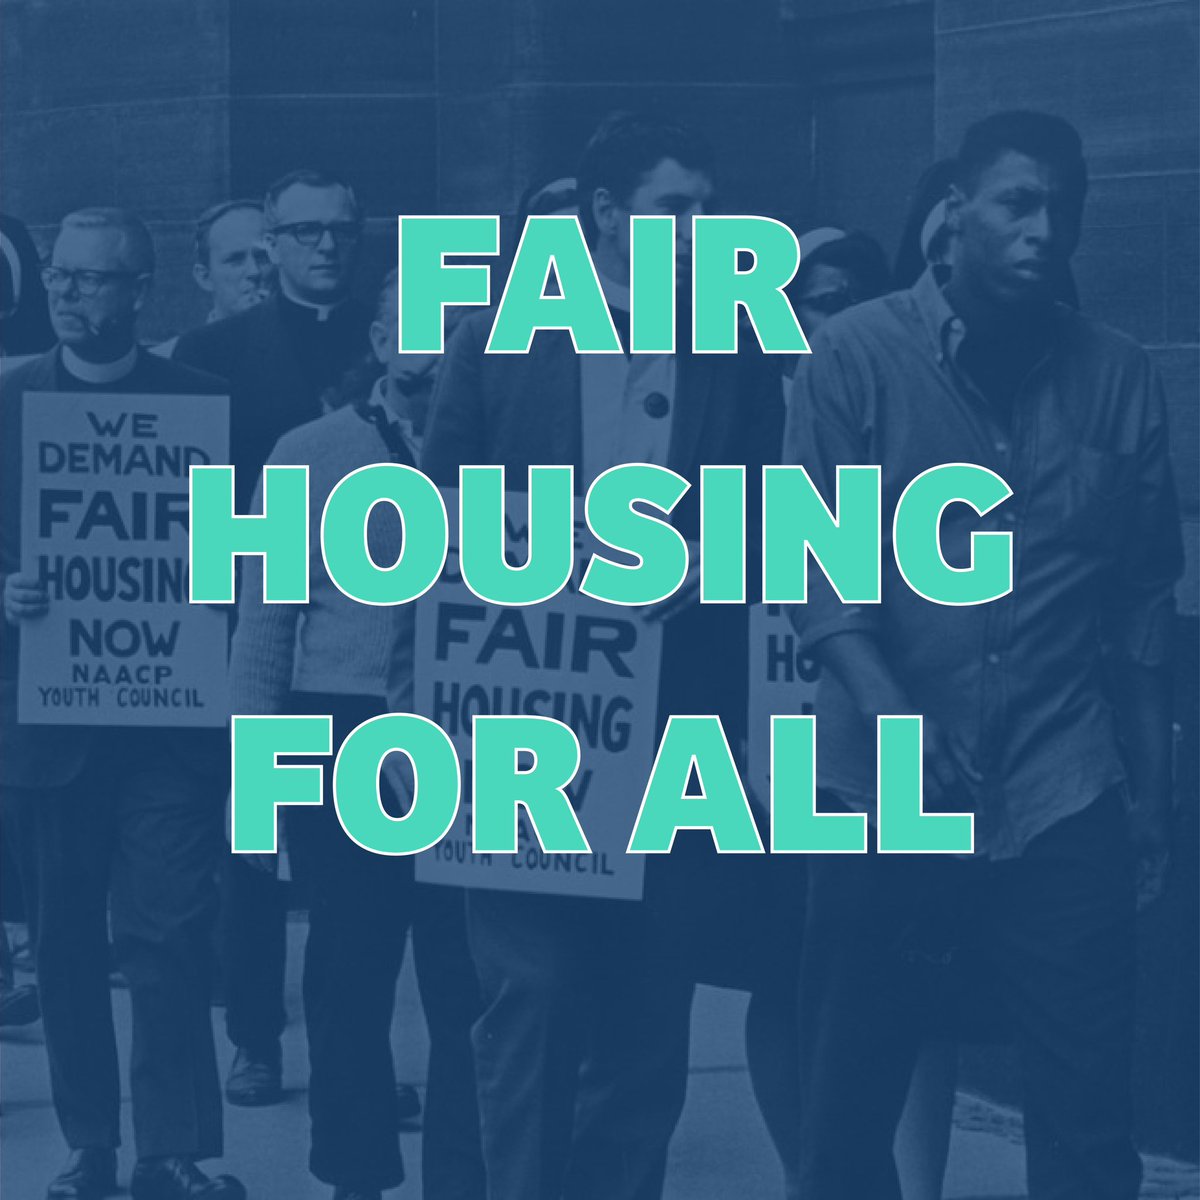 Everyone deserves equal access to safe and affordable housing. This #FairHousingMonth and every month, we’re working to expand opportunities for homeowners and renters, fight housing discrimination, and lower housing costs.